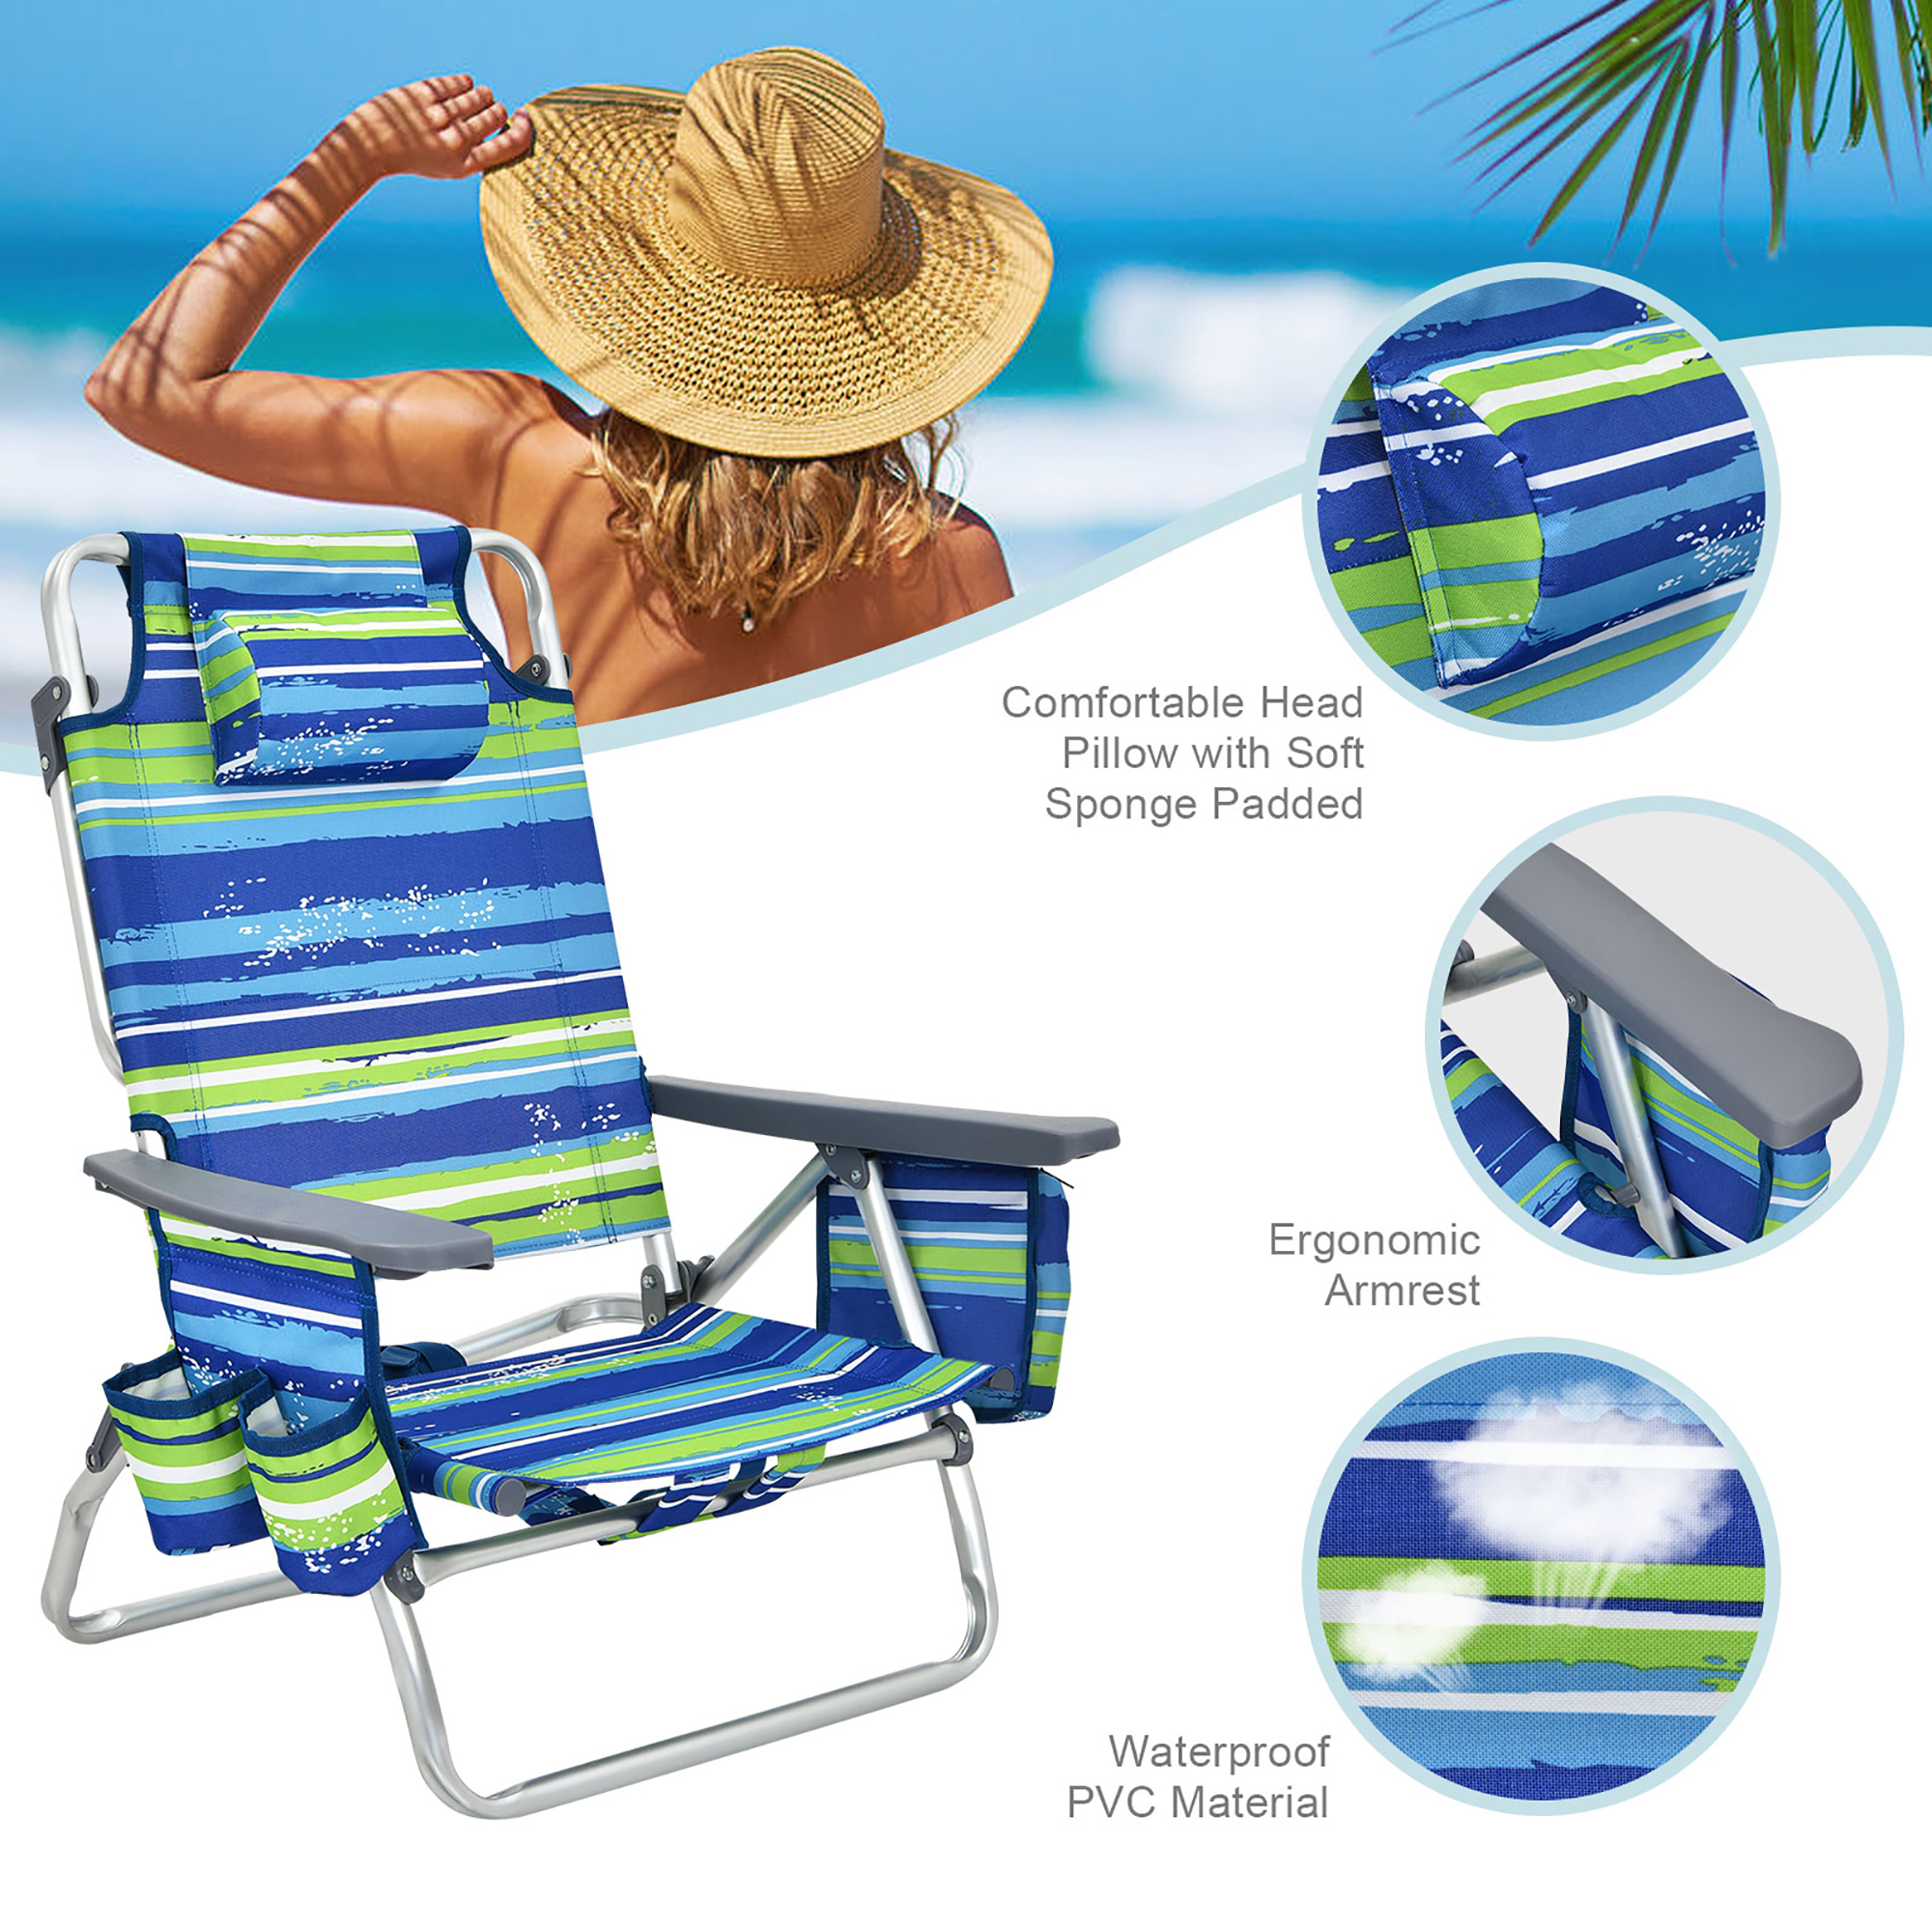 Costway 2-Pack Folding Backpack Beach Chair 5-Position Outdoor Reclining Chairs w/Pillow Blue - image 5 of 10